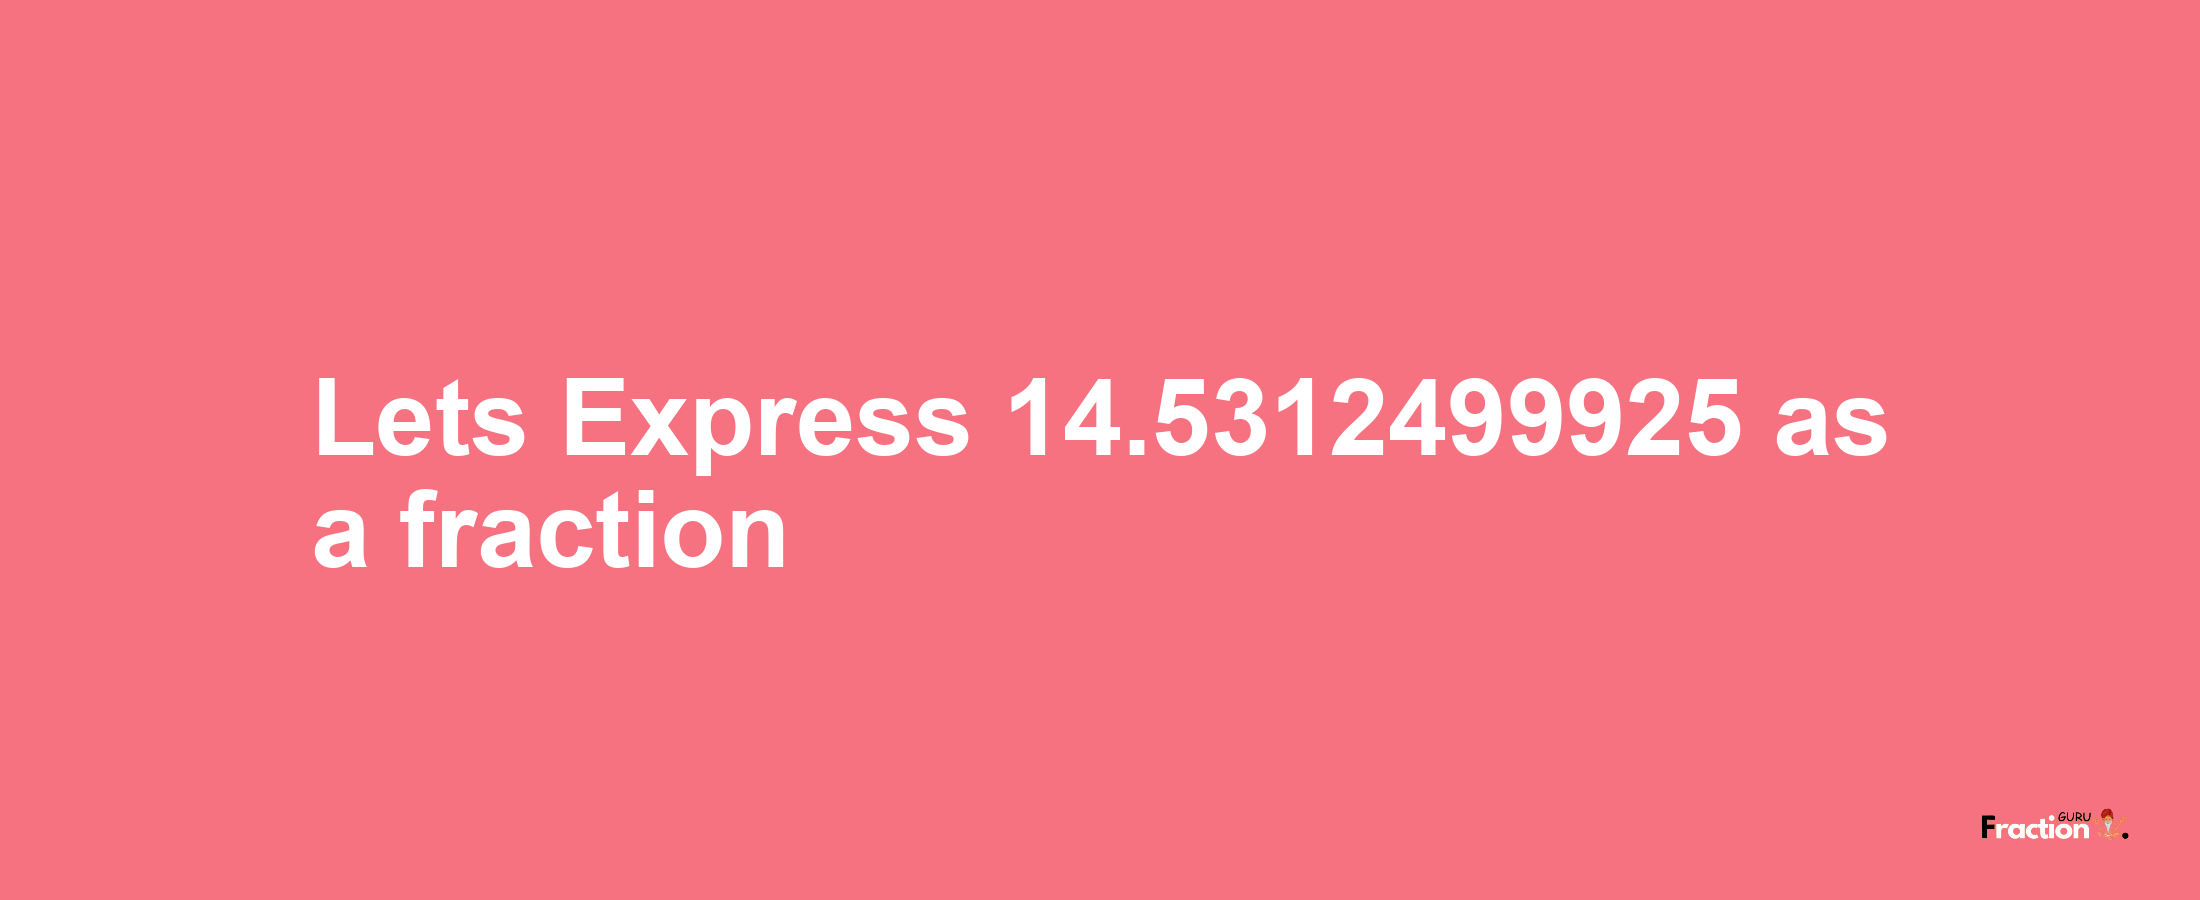 Lets Express 14.5312499925 as afraction